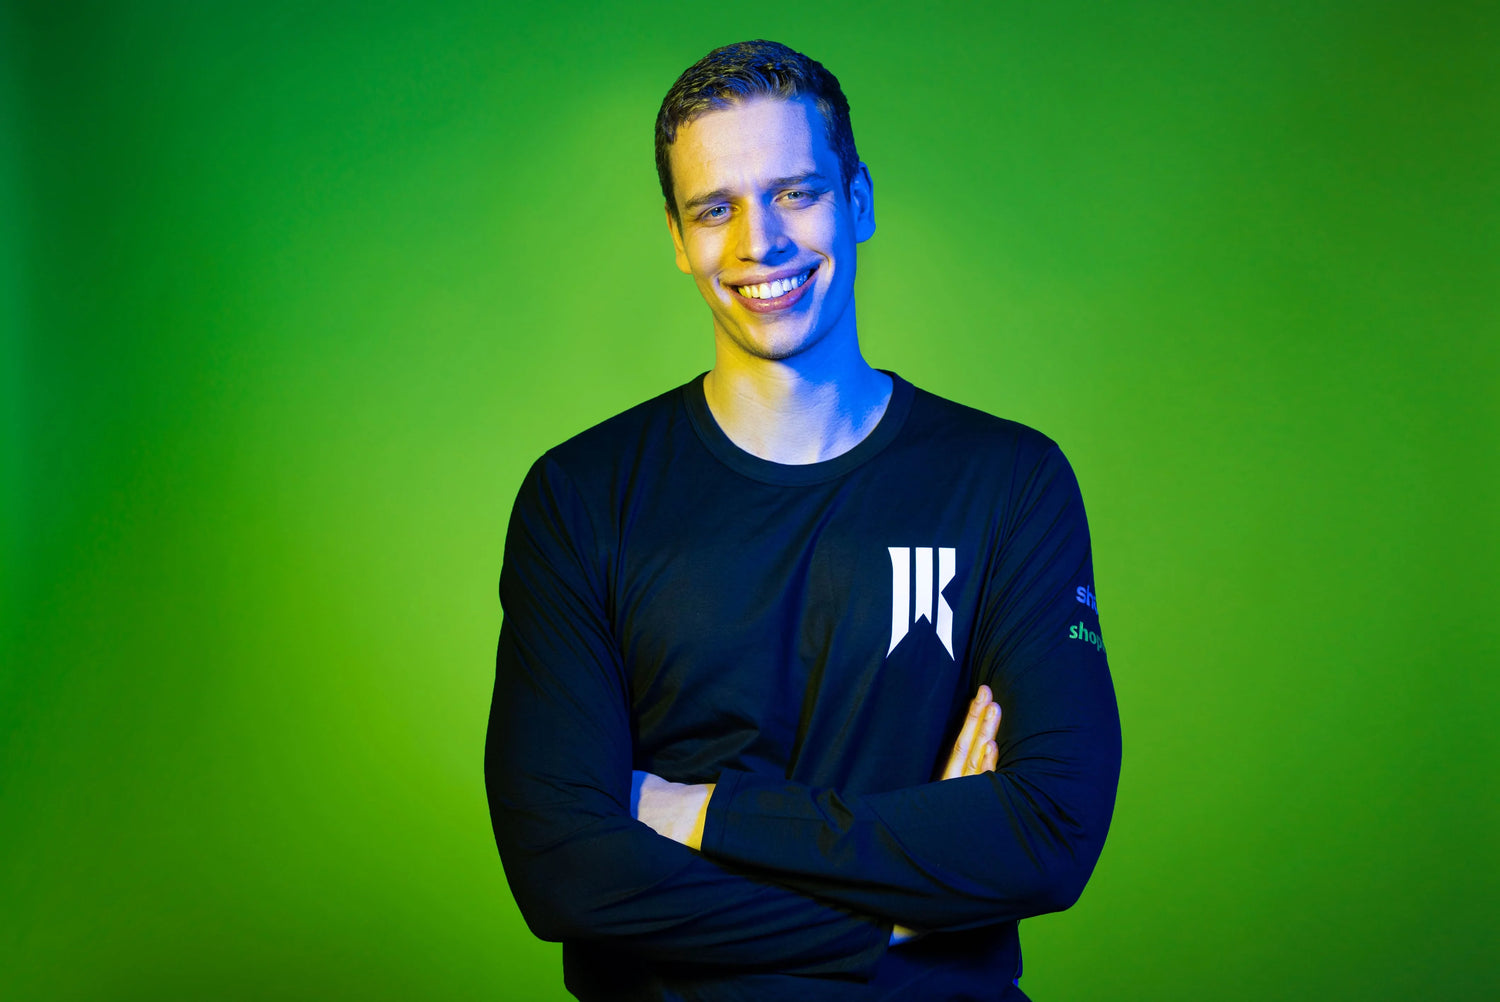 Player (Harstem) with a Rebellion shirt and a green background